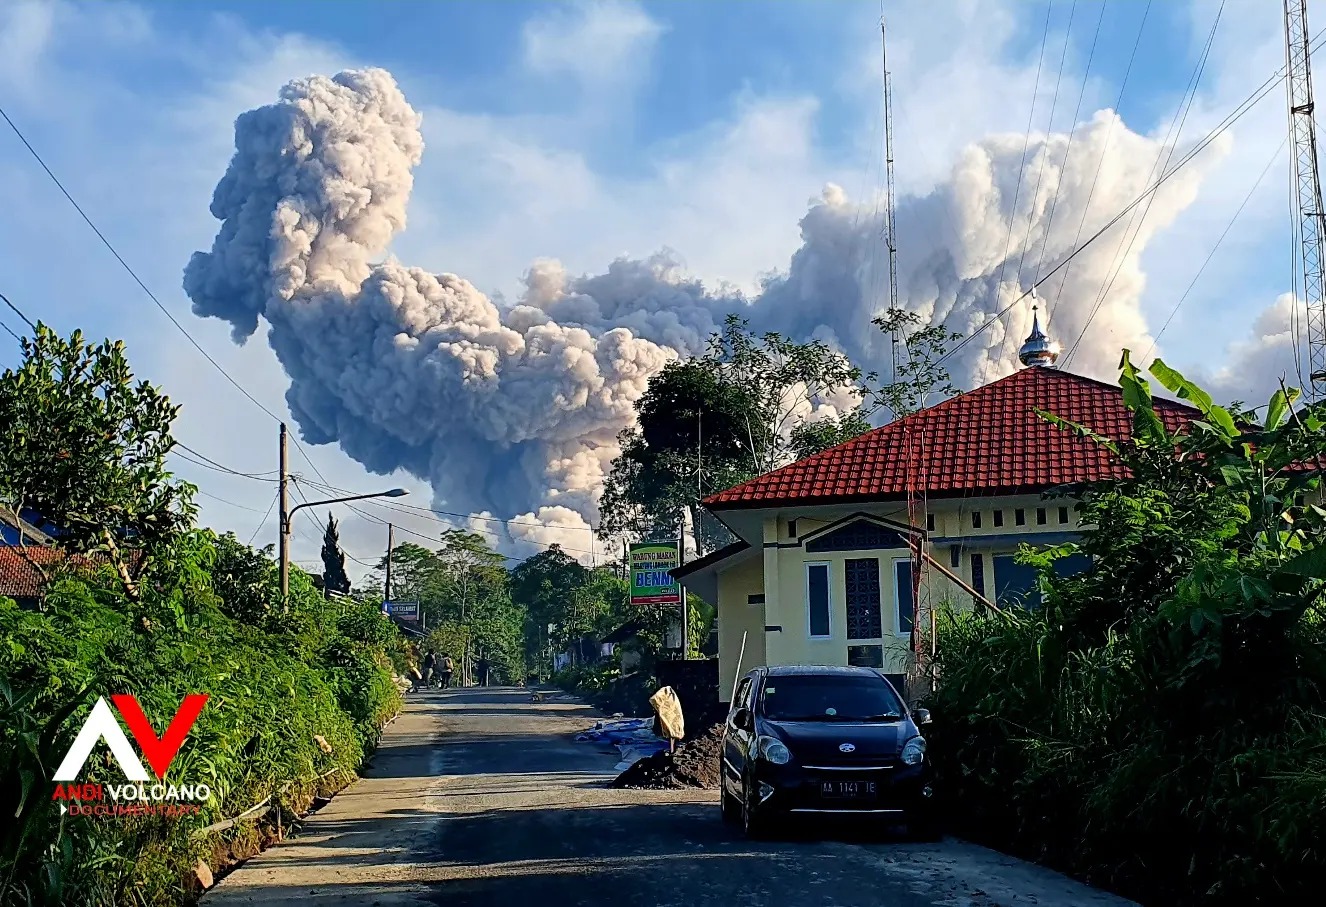 Phoenix clouds resulted from pyroclastic flow from Merapi today (image: Andi/VolcanoDiscovery Indonesia)